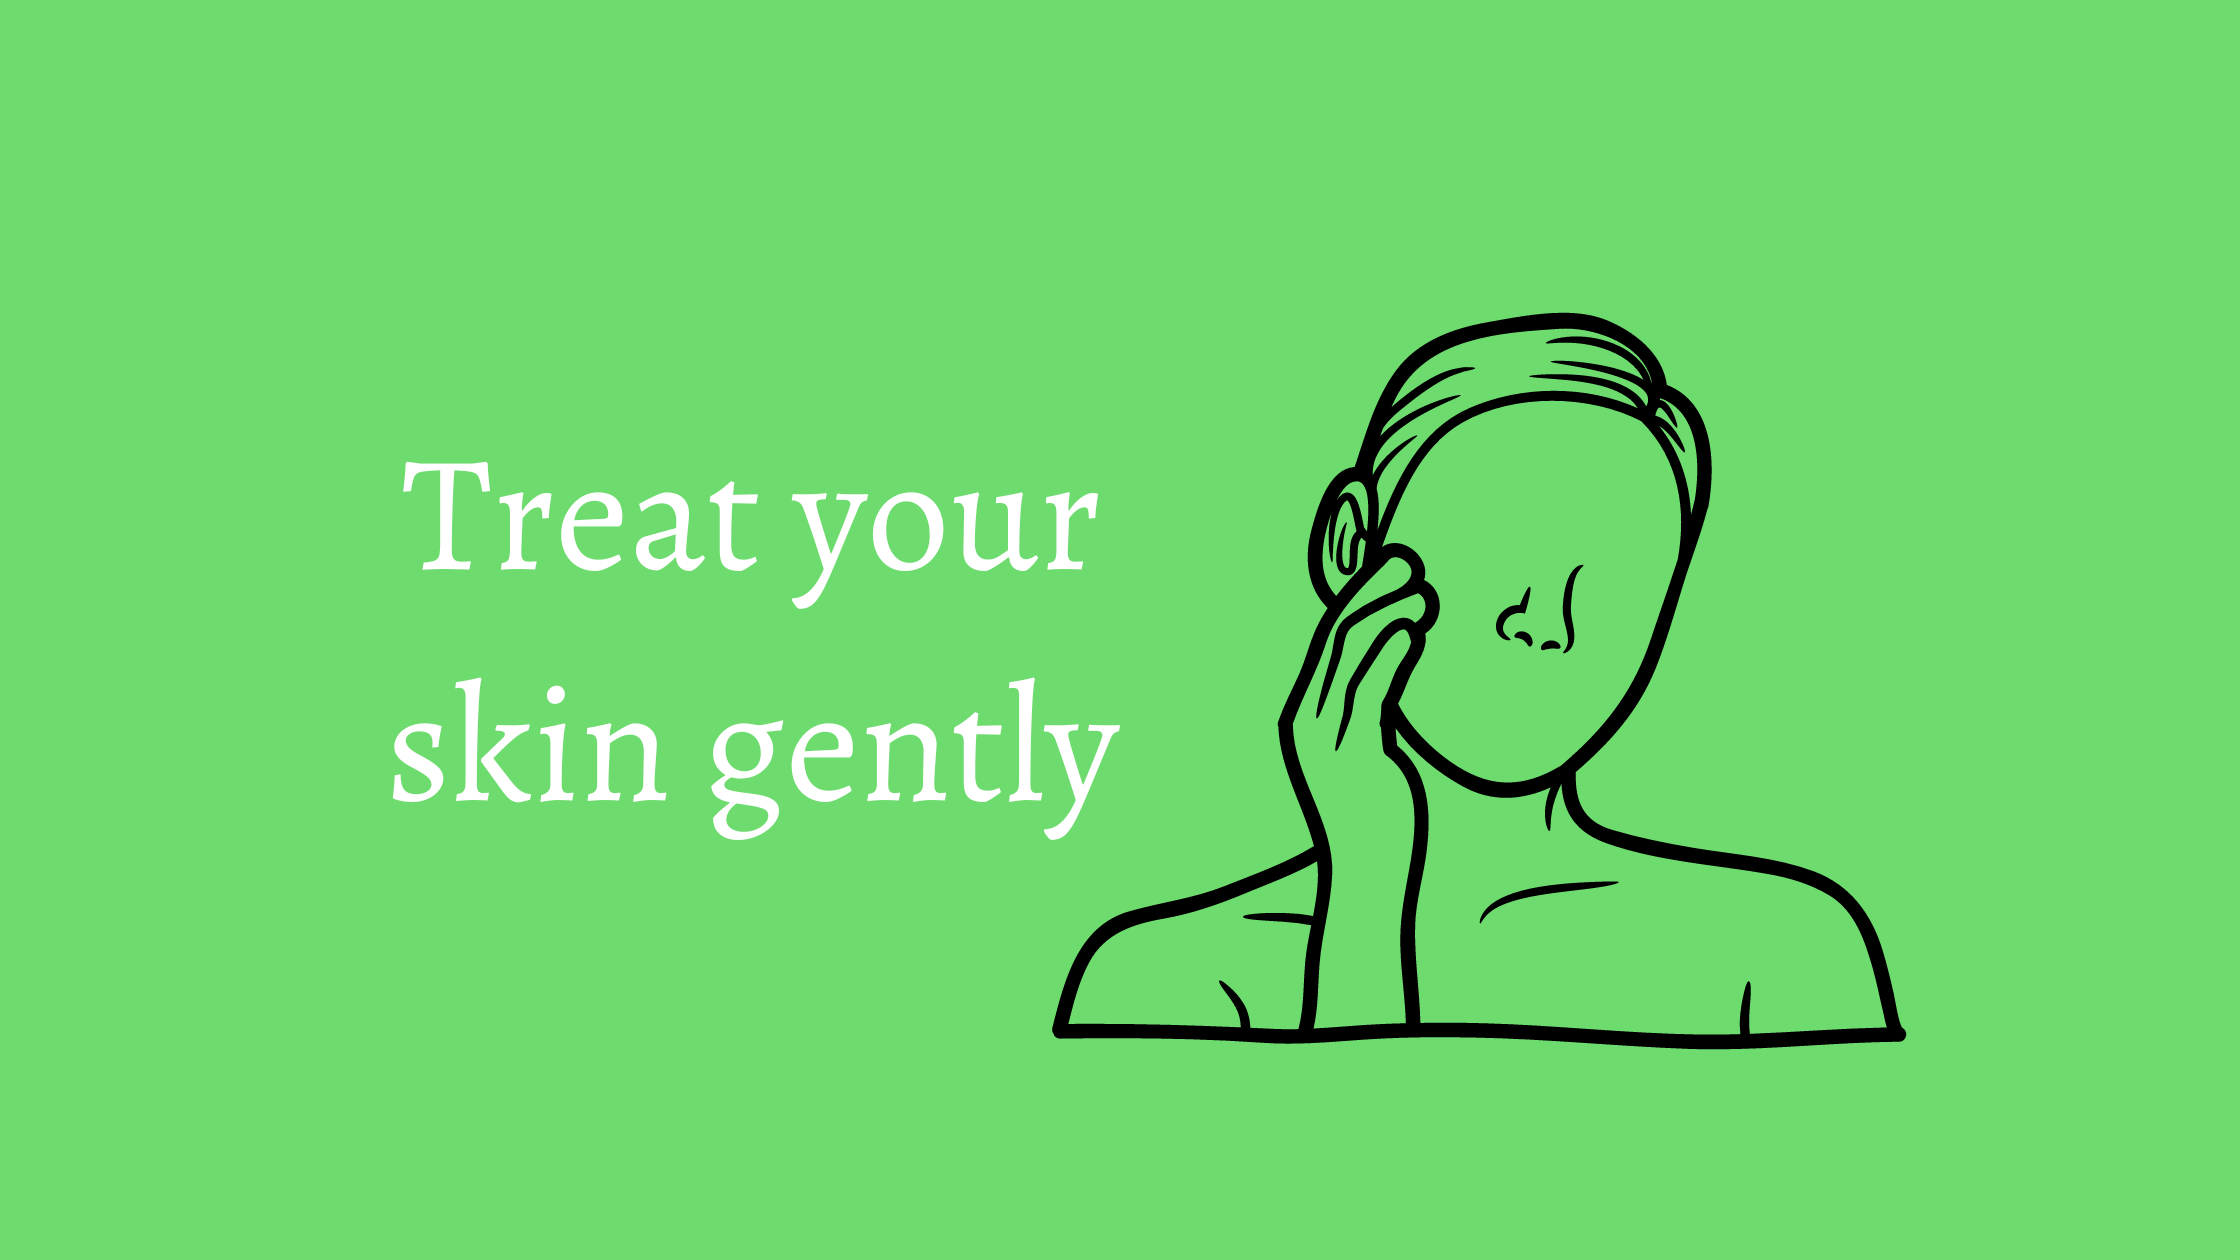 Treat your skin gently